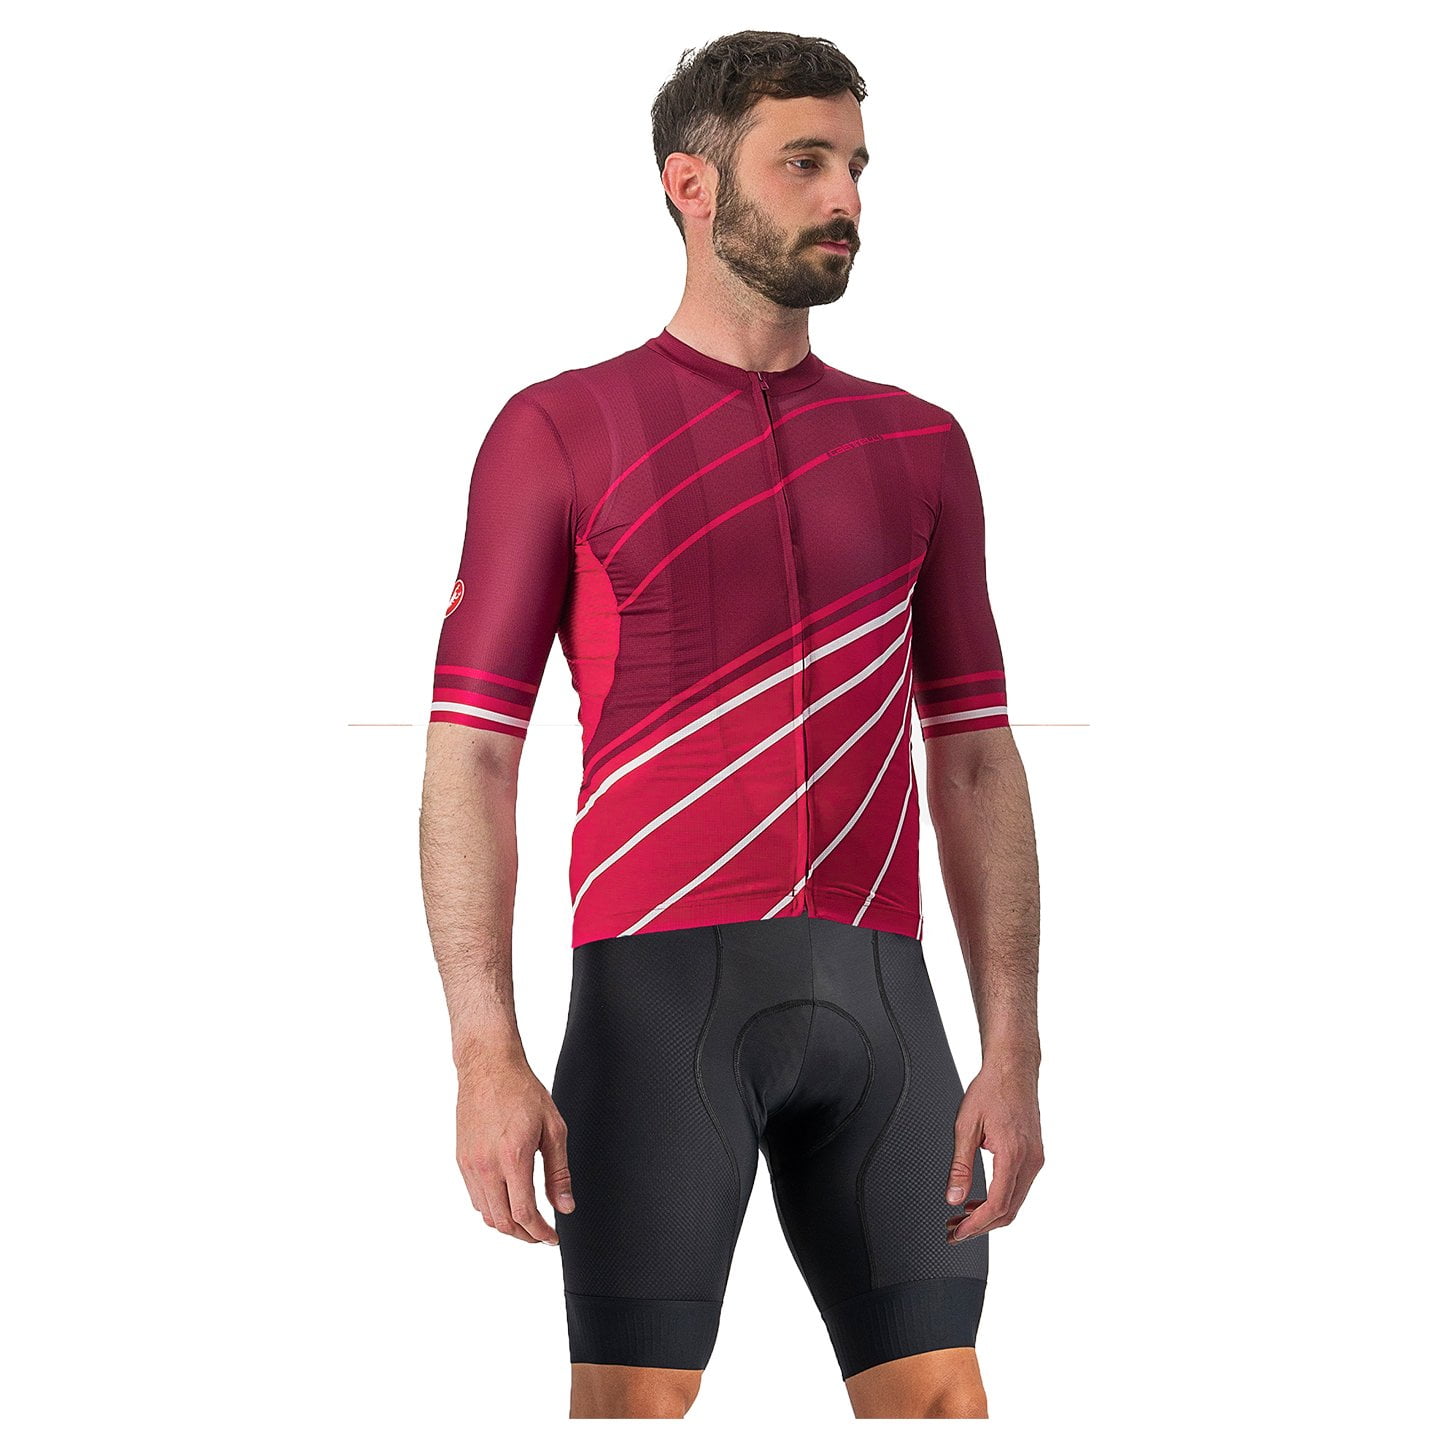 CASTELLI Speed Strada Set (cycling jersey + cycling shorts) Set (2 pieces), for men